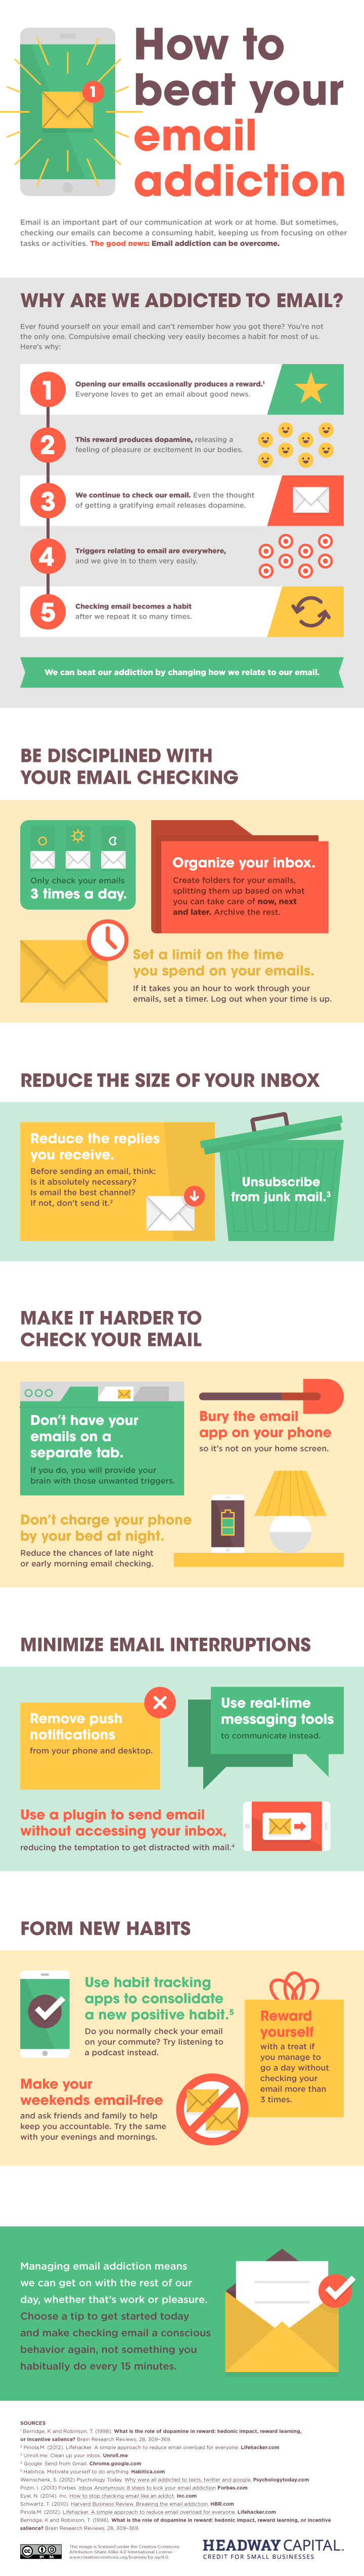 How To Beat Your Email Addiction